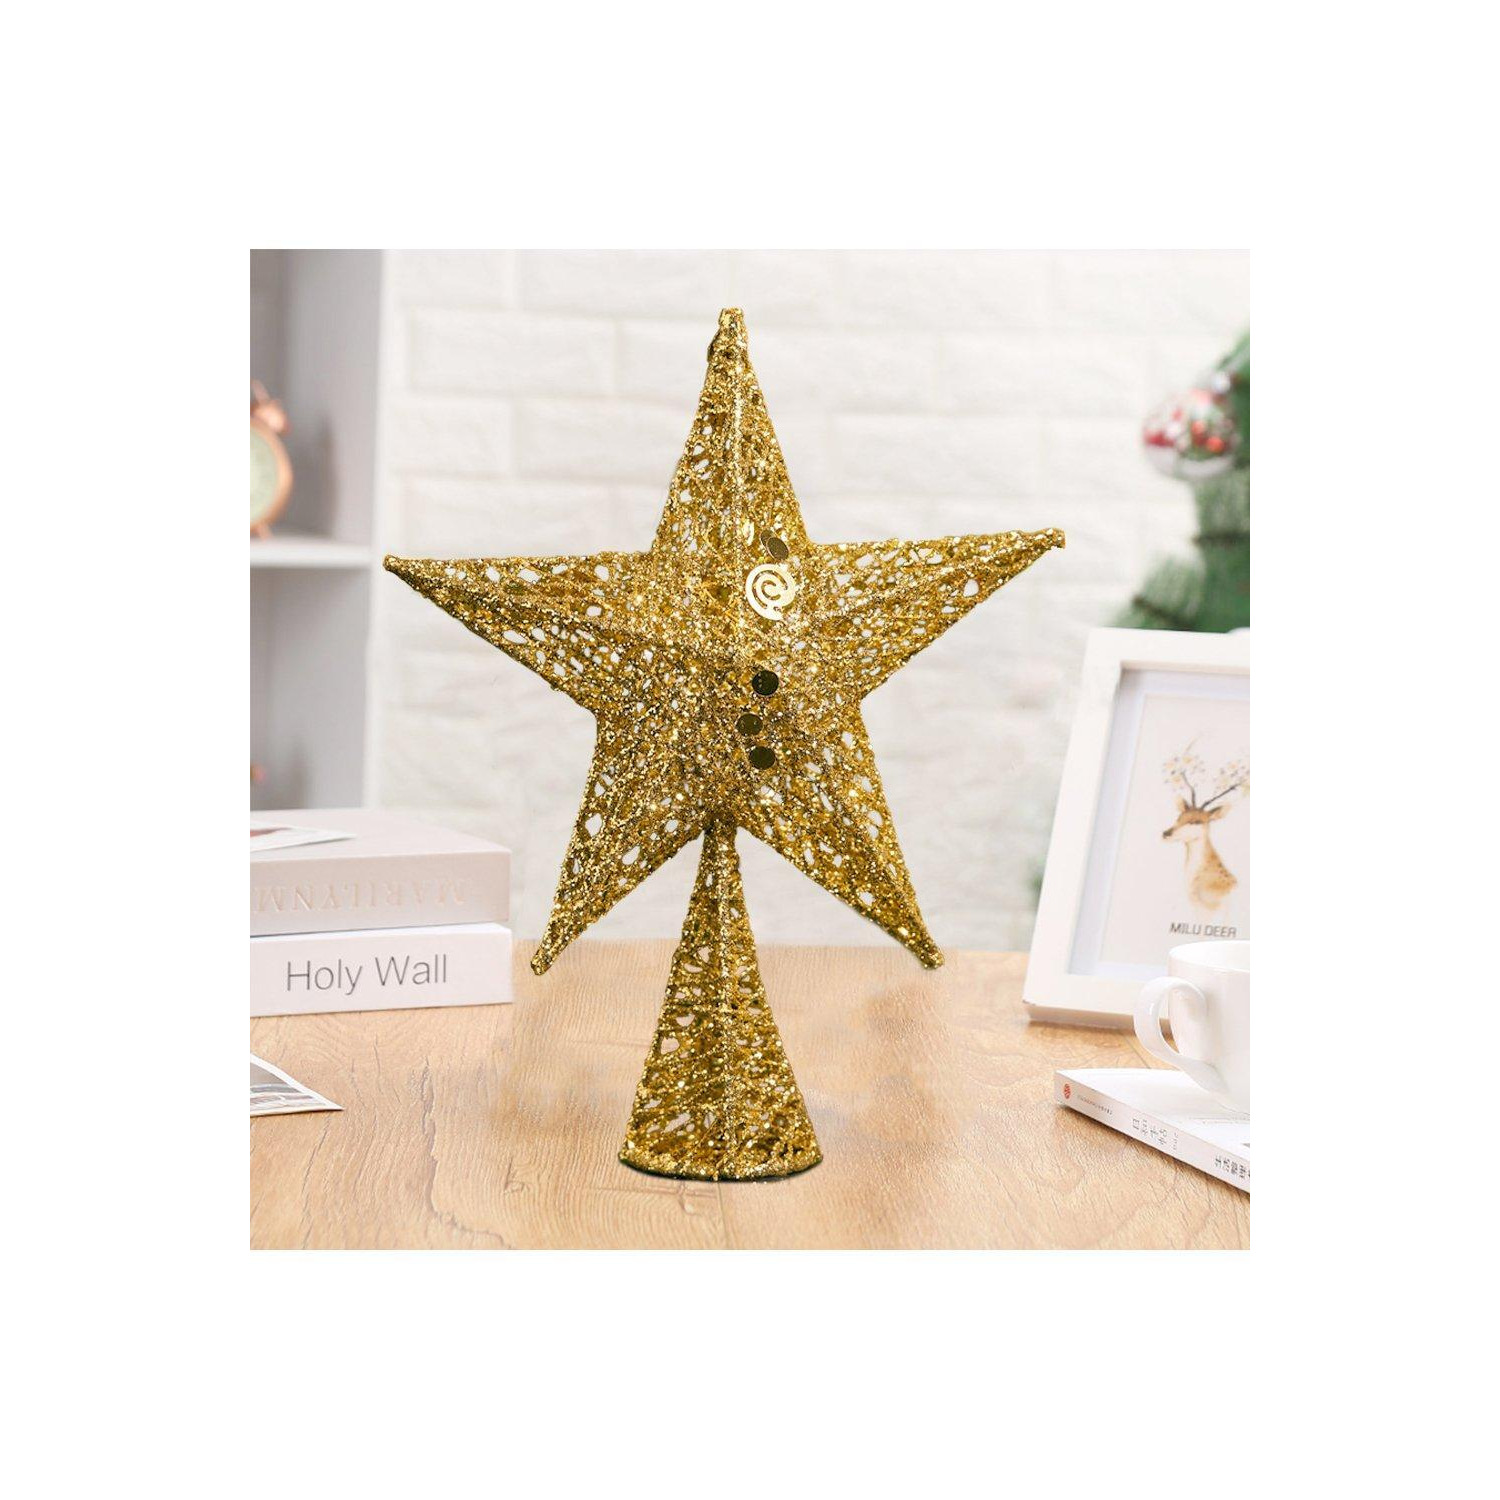 Wrought Iron Christmas Tree Topper Star Ornament Home Decor - image 1